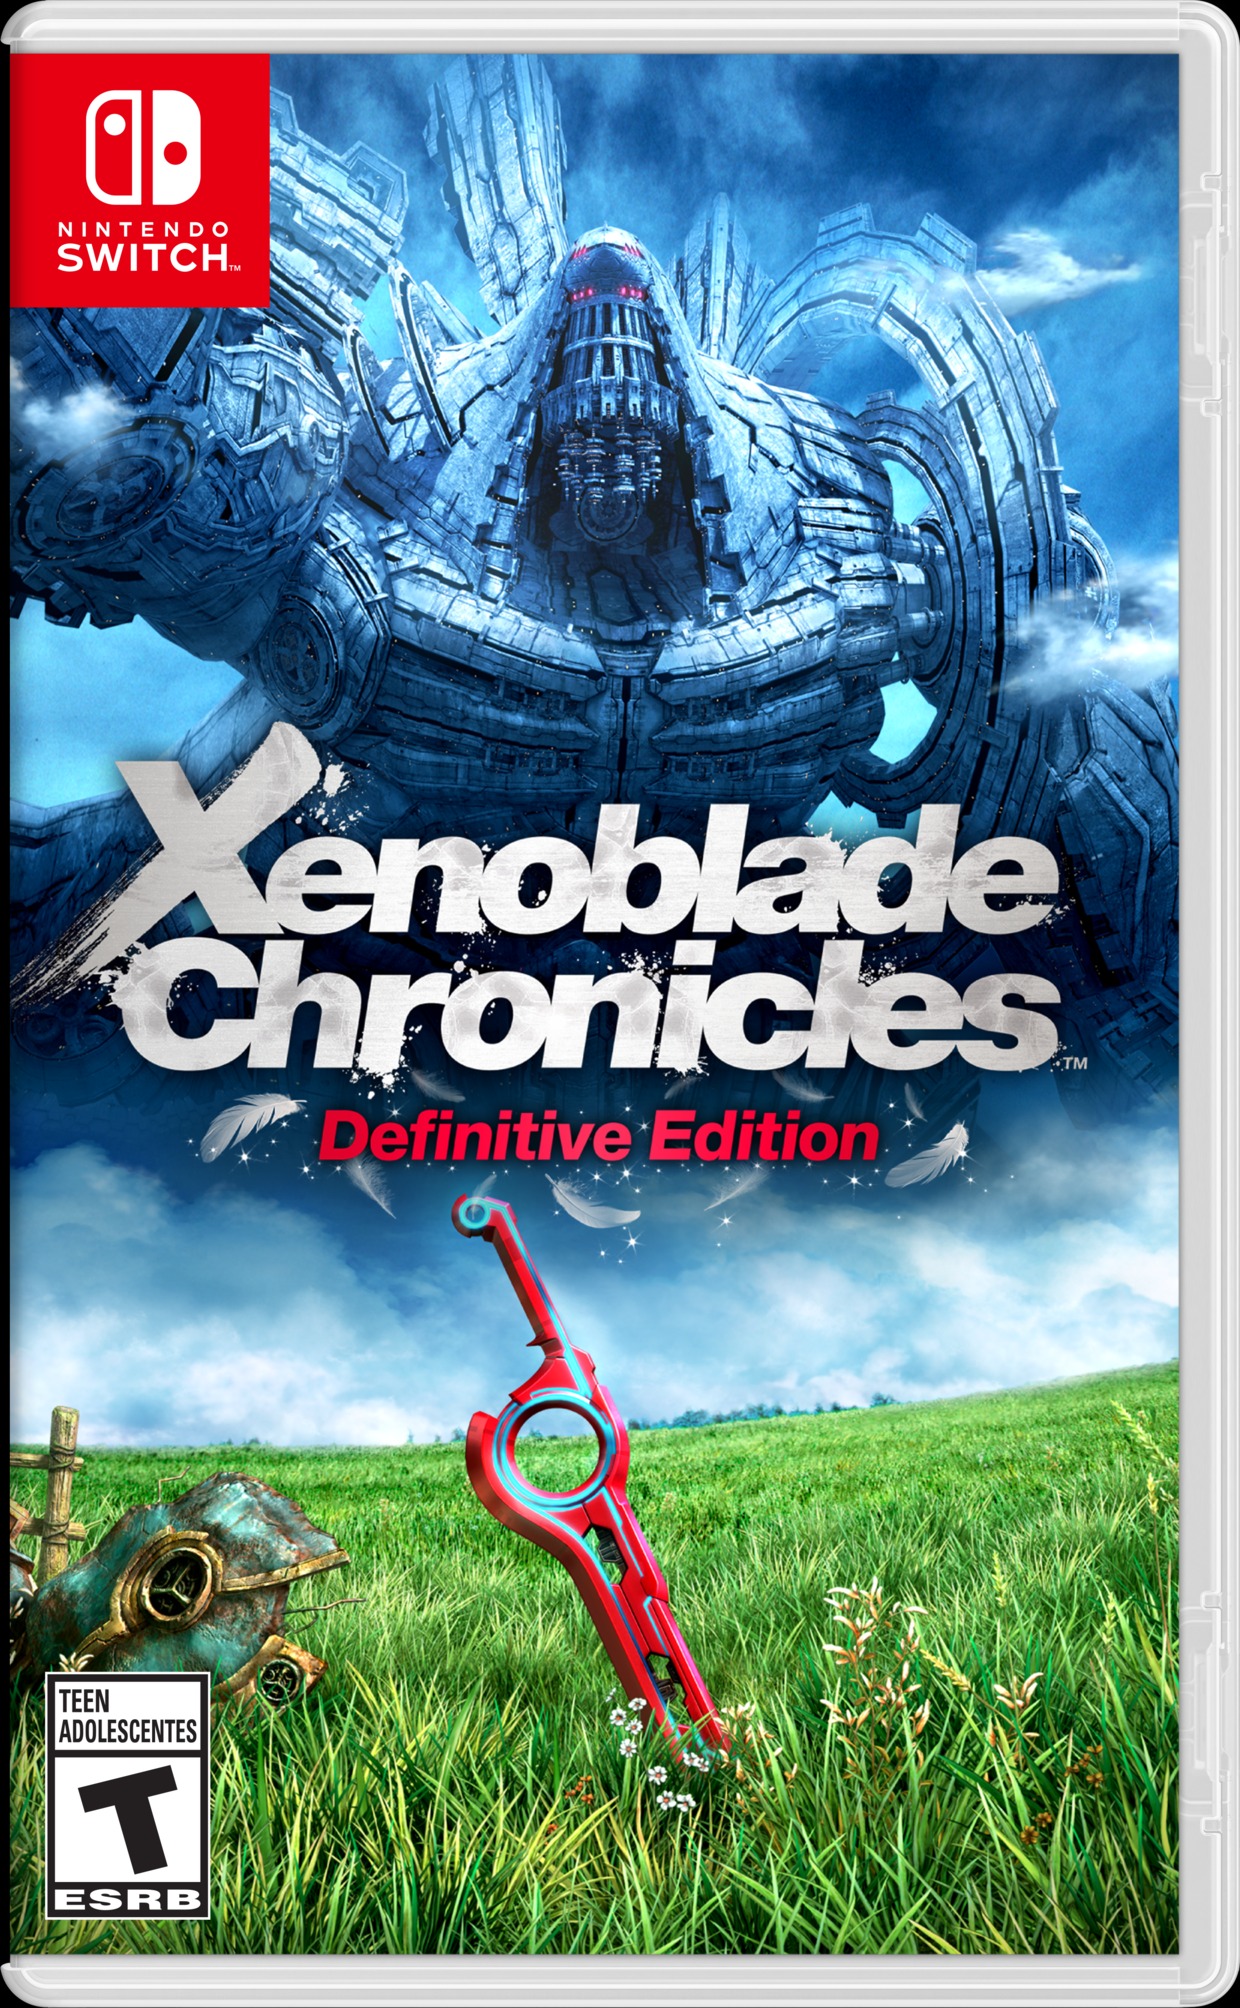 xenoblade chronicles wii iso pal torrent